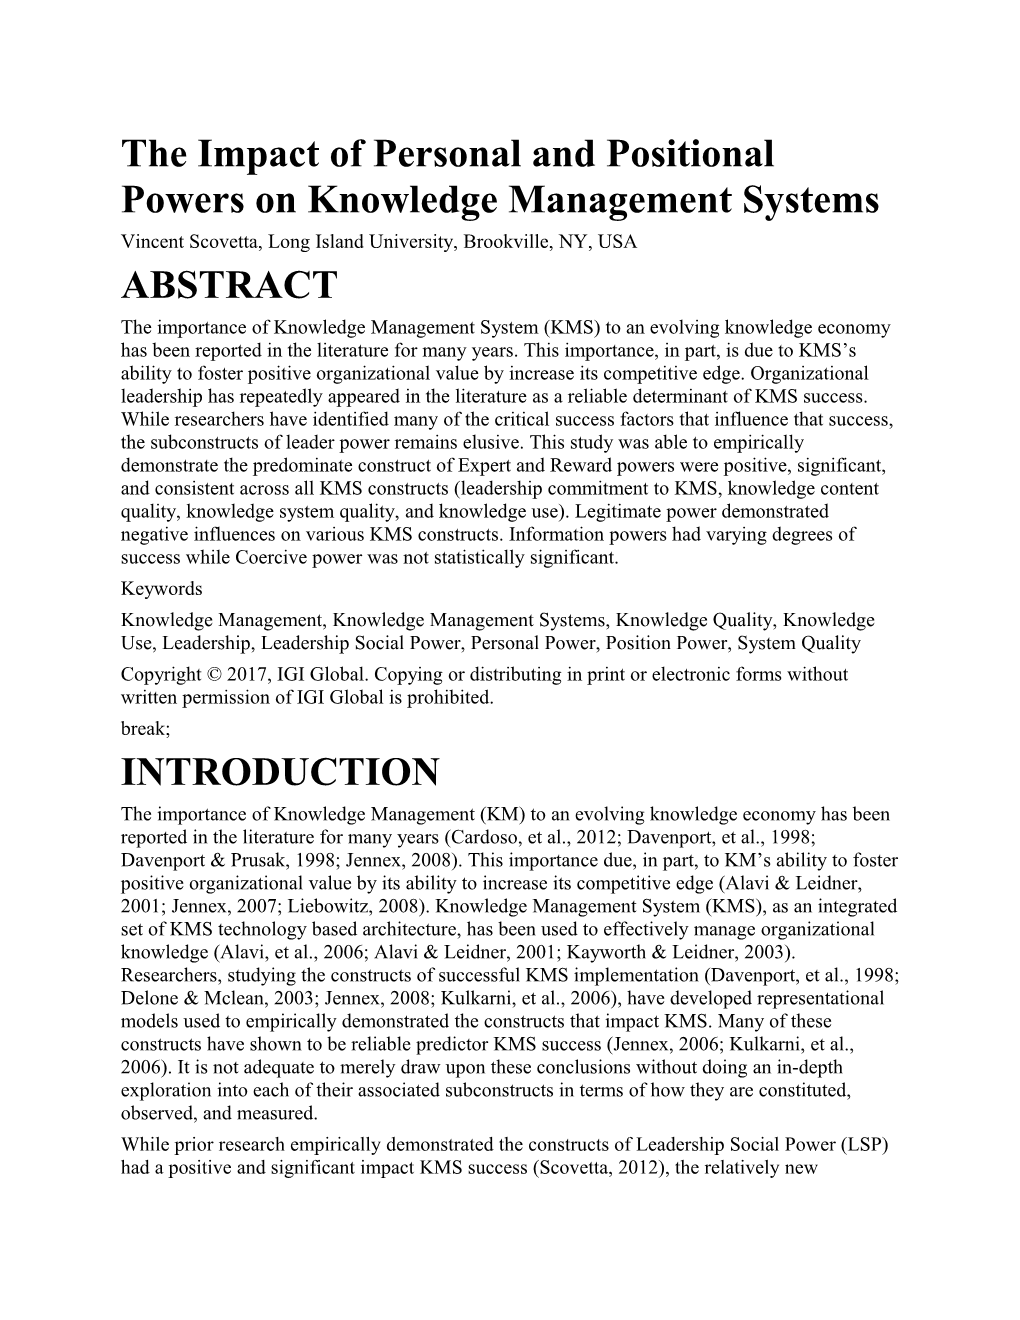 The Impact of Personal and Positional Powers on Knowledge Management Systems